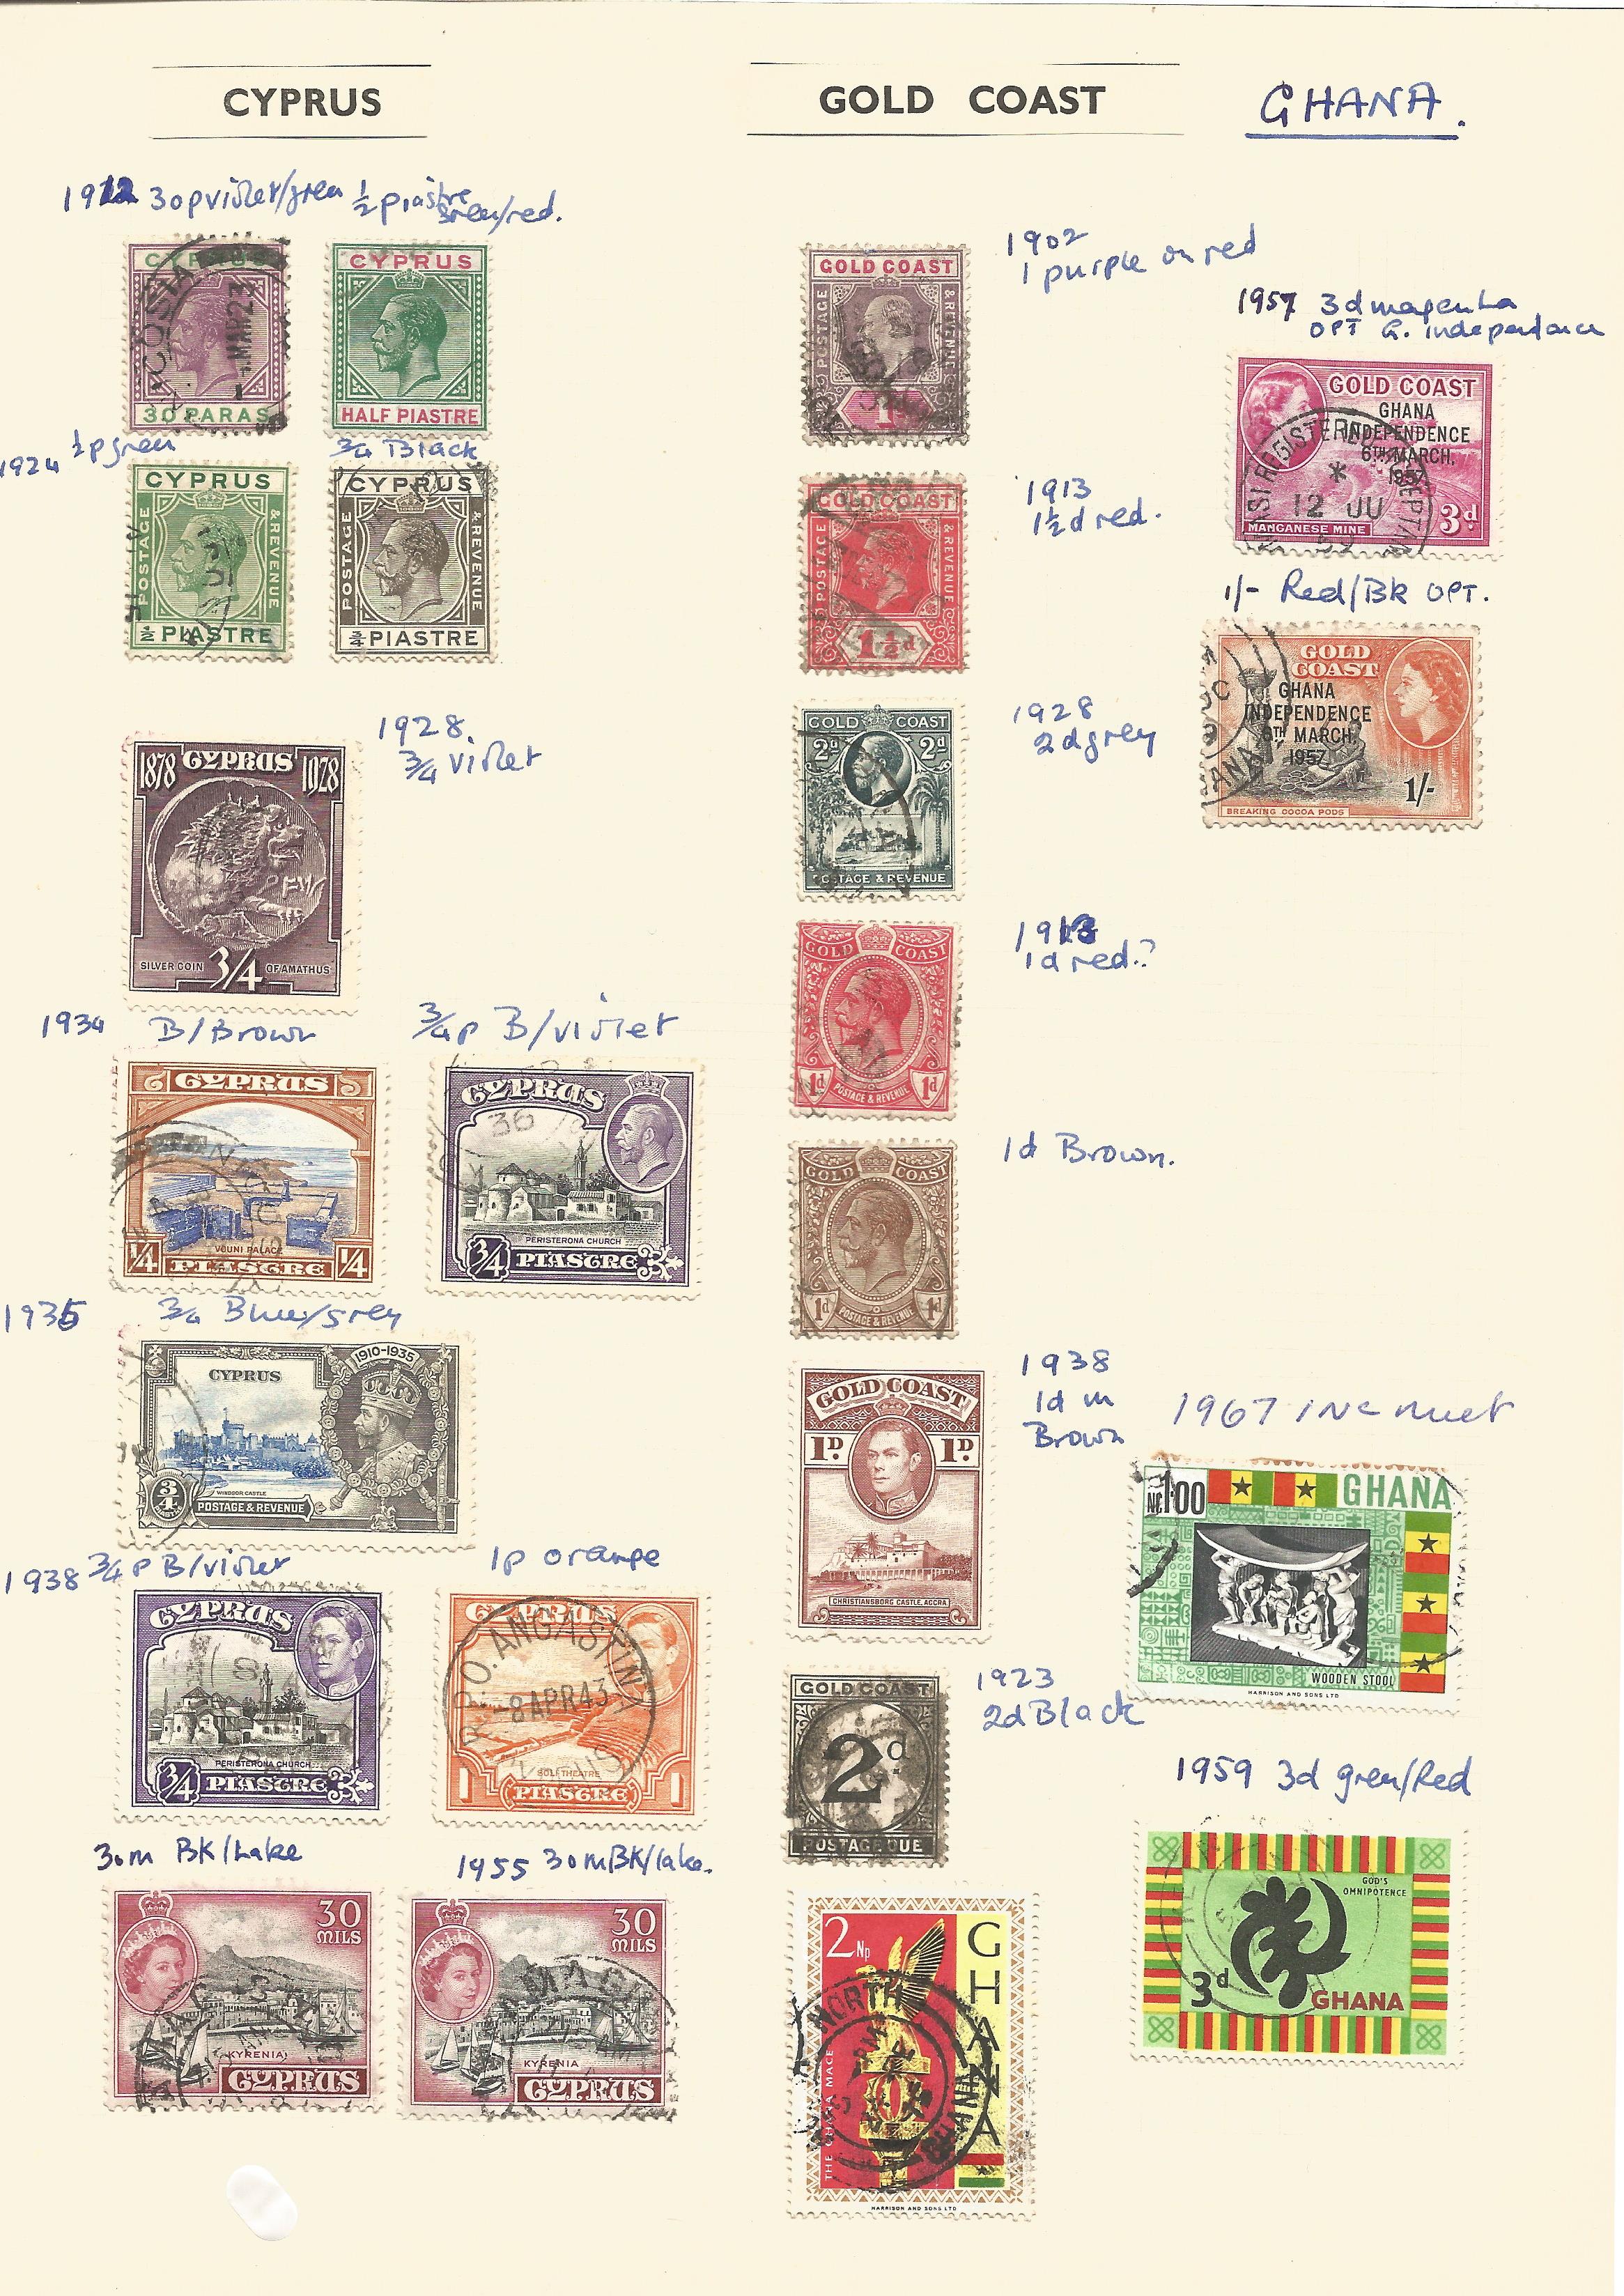 Orange Free State, Queensland, Gold Coast, Cyprus, stamps on loose sheets, approx. 50. Good